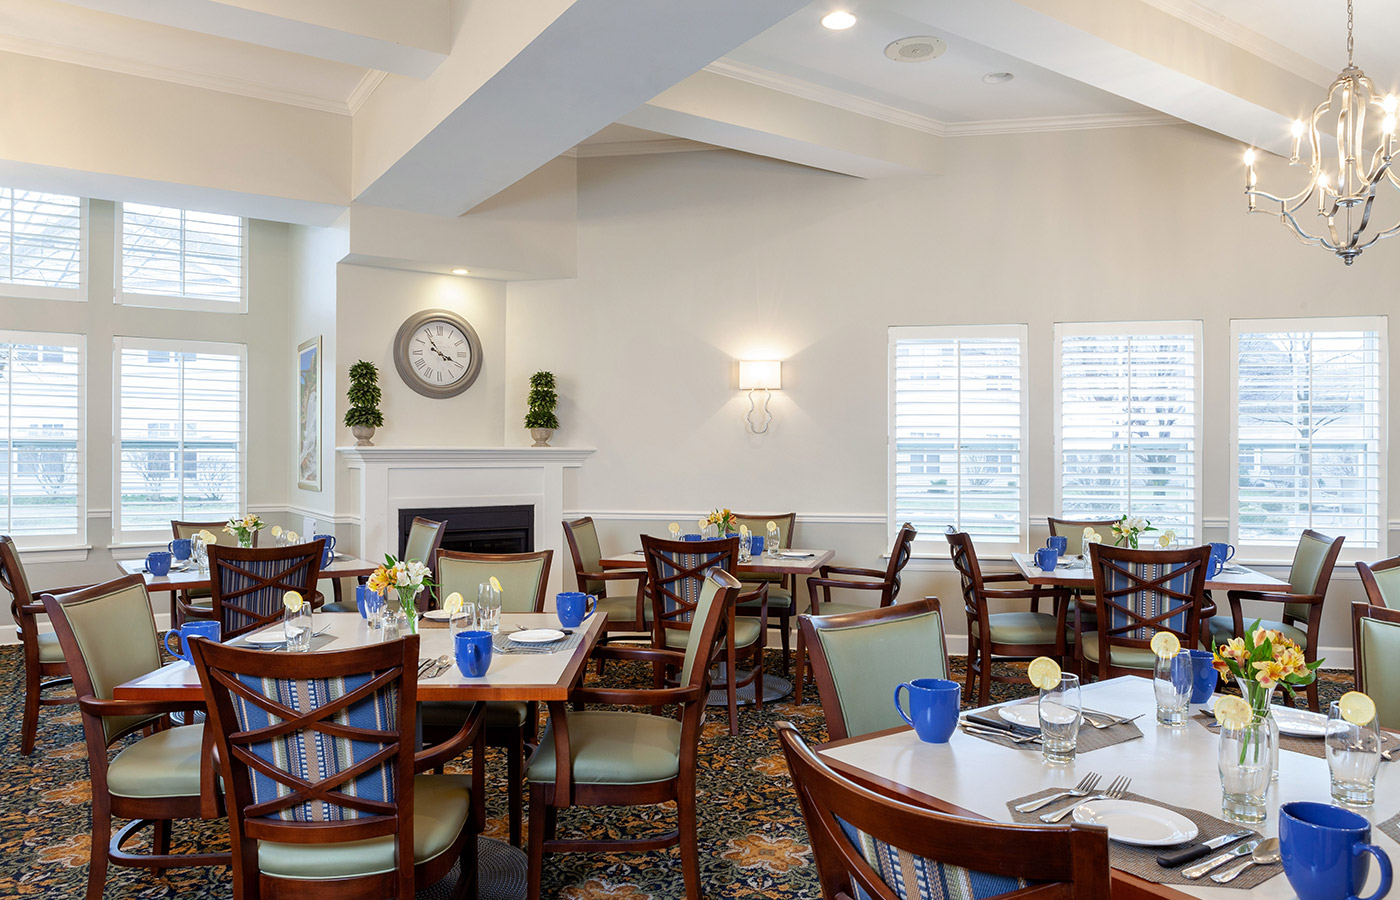 A dining area at The Legacy at Park Crescent.